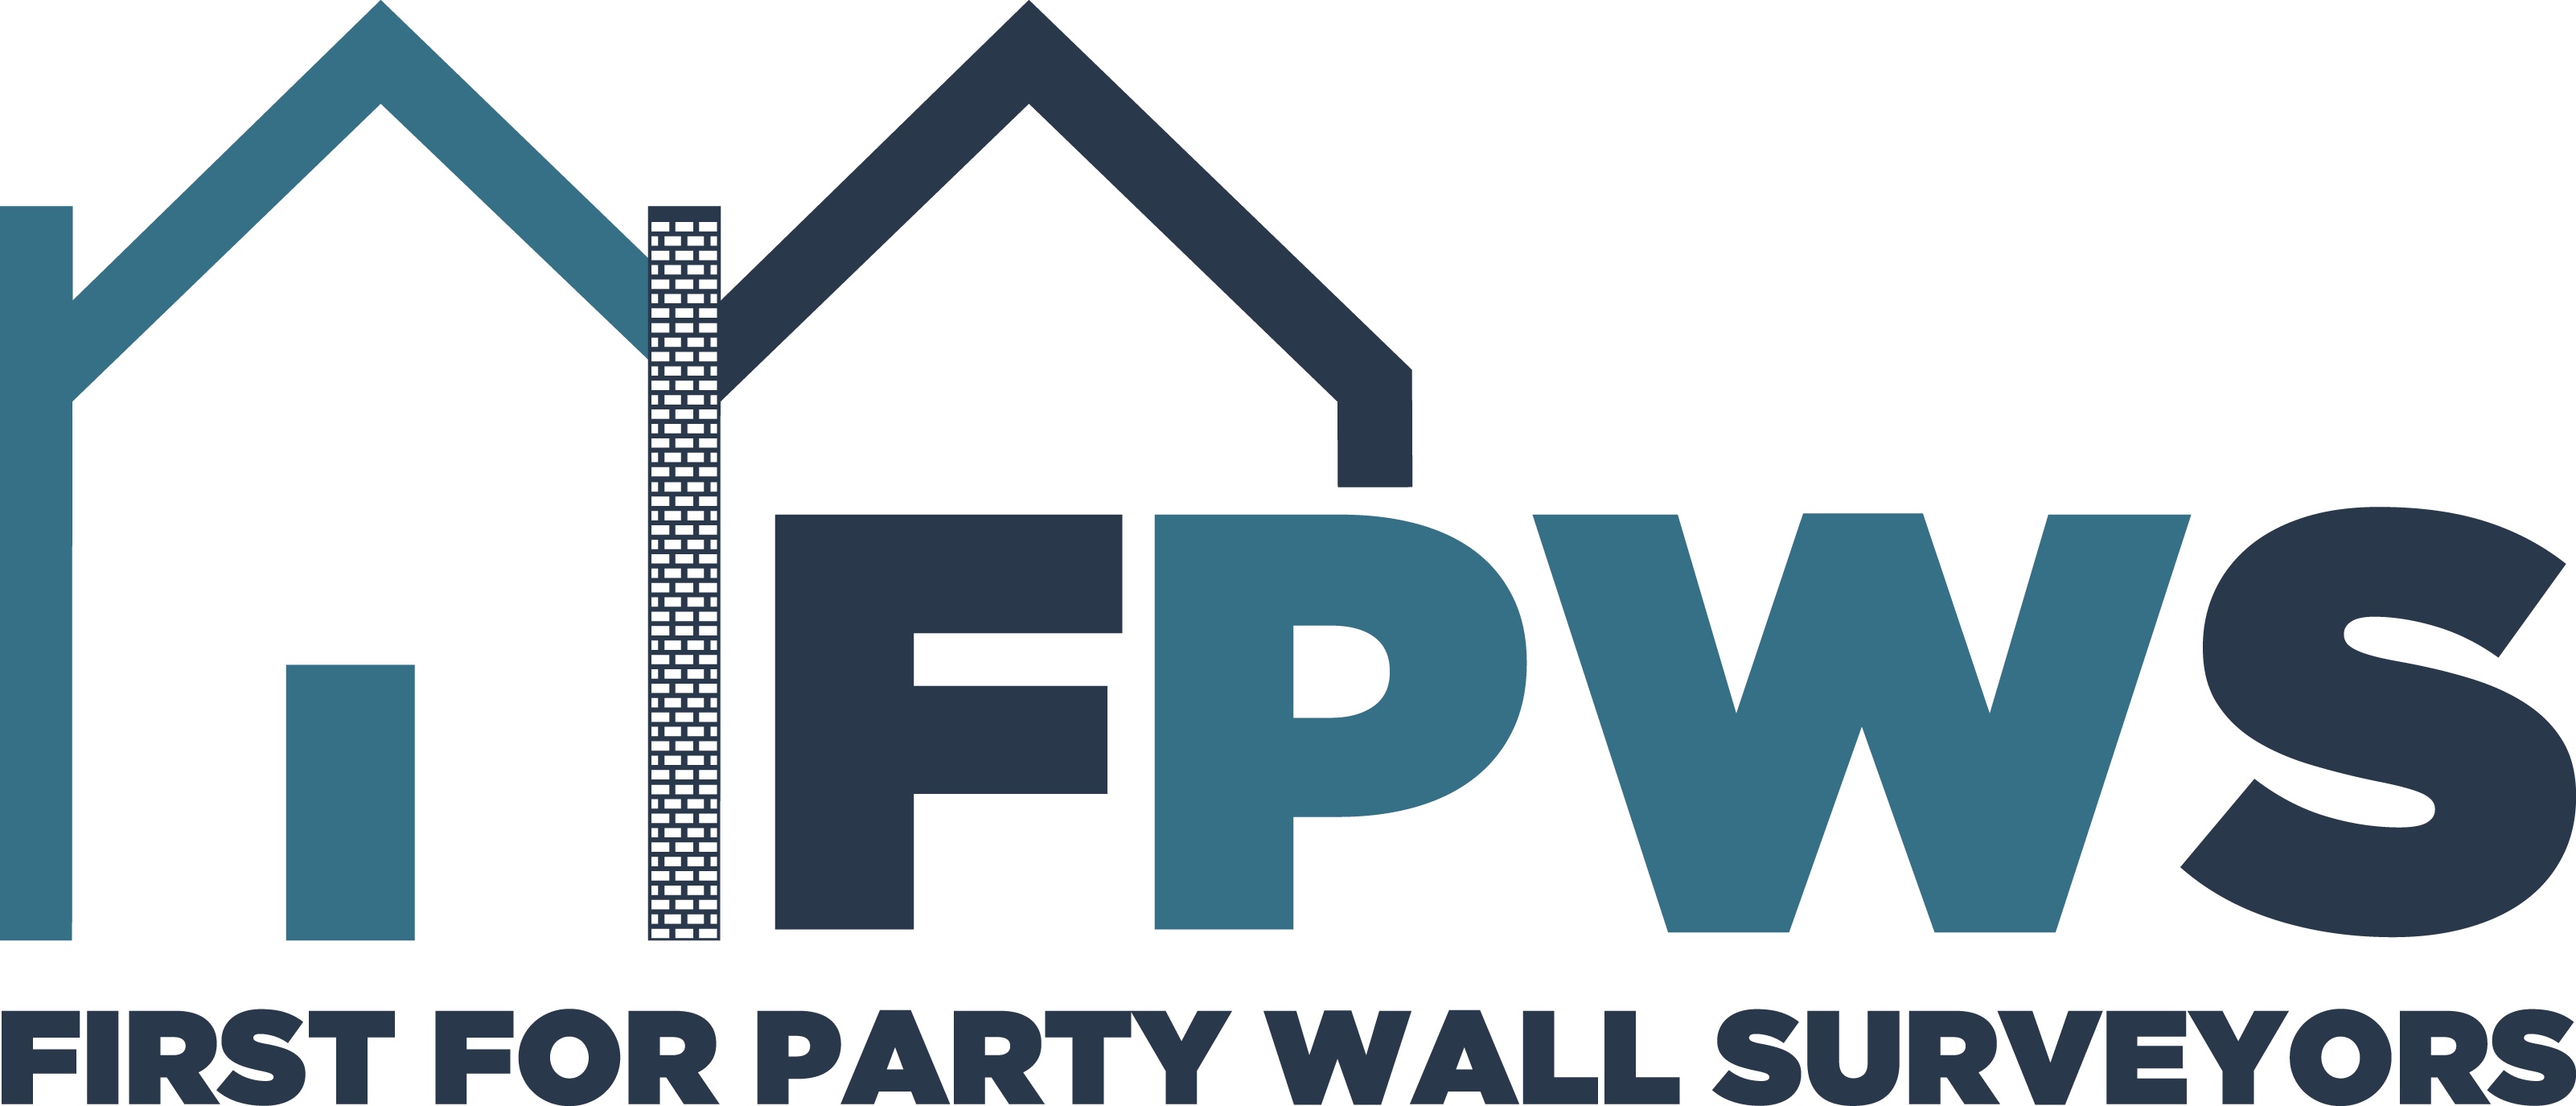 First for Party wall surveyors